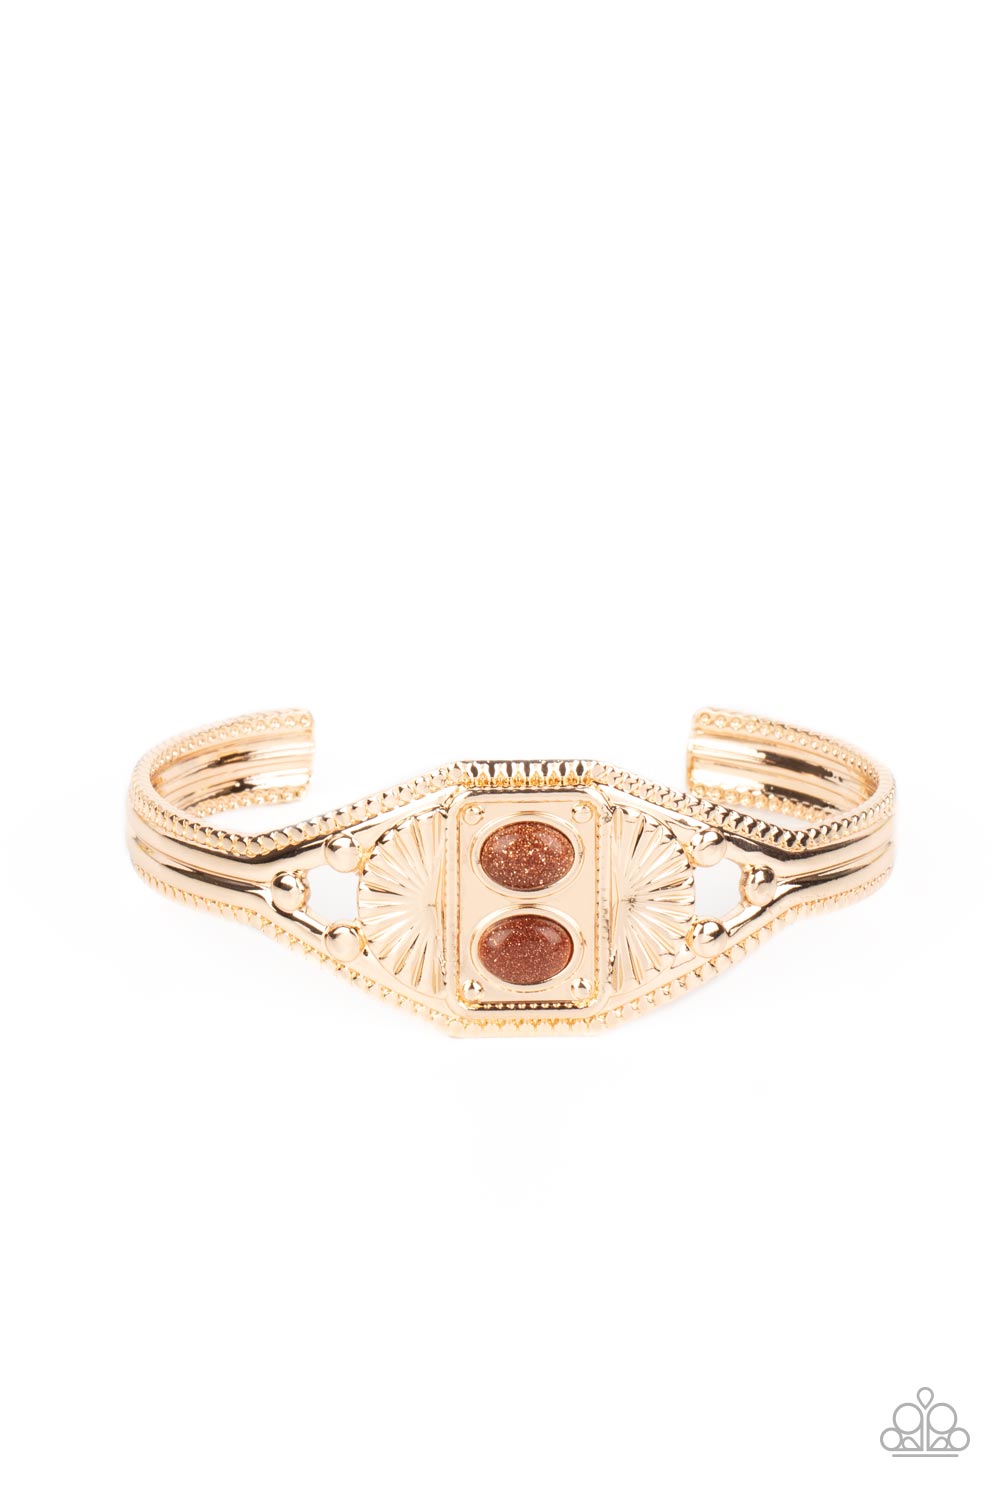 Dressed to Frill Rose Gold Bracelet - Jewelry by Bretta